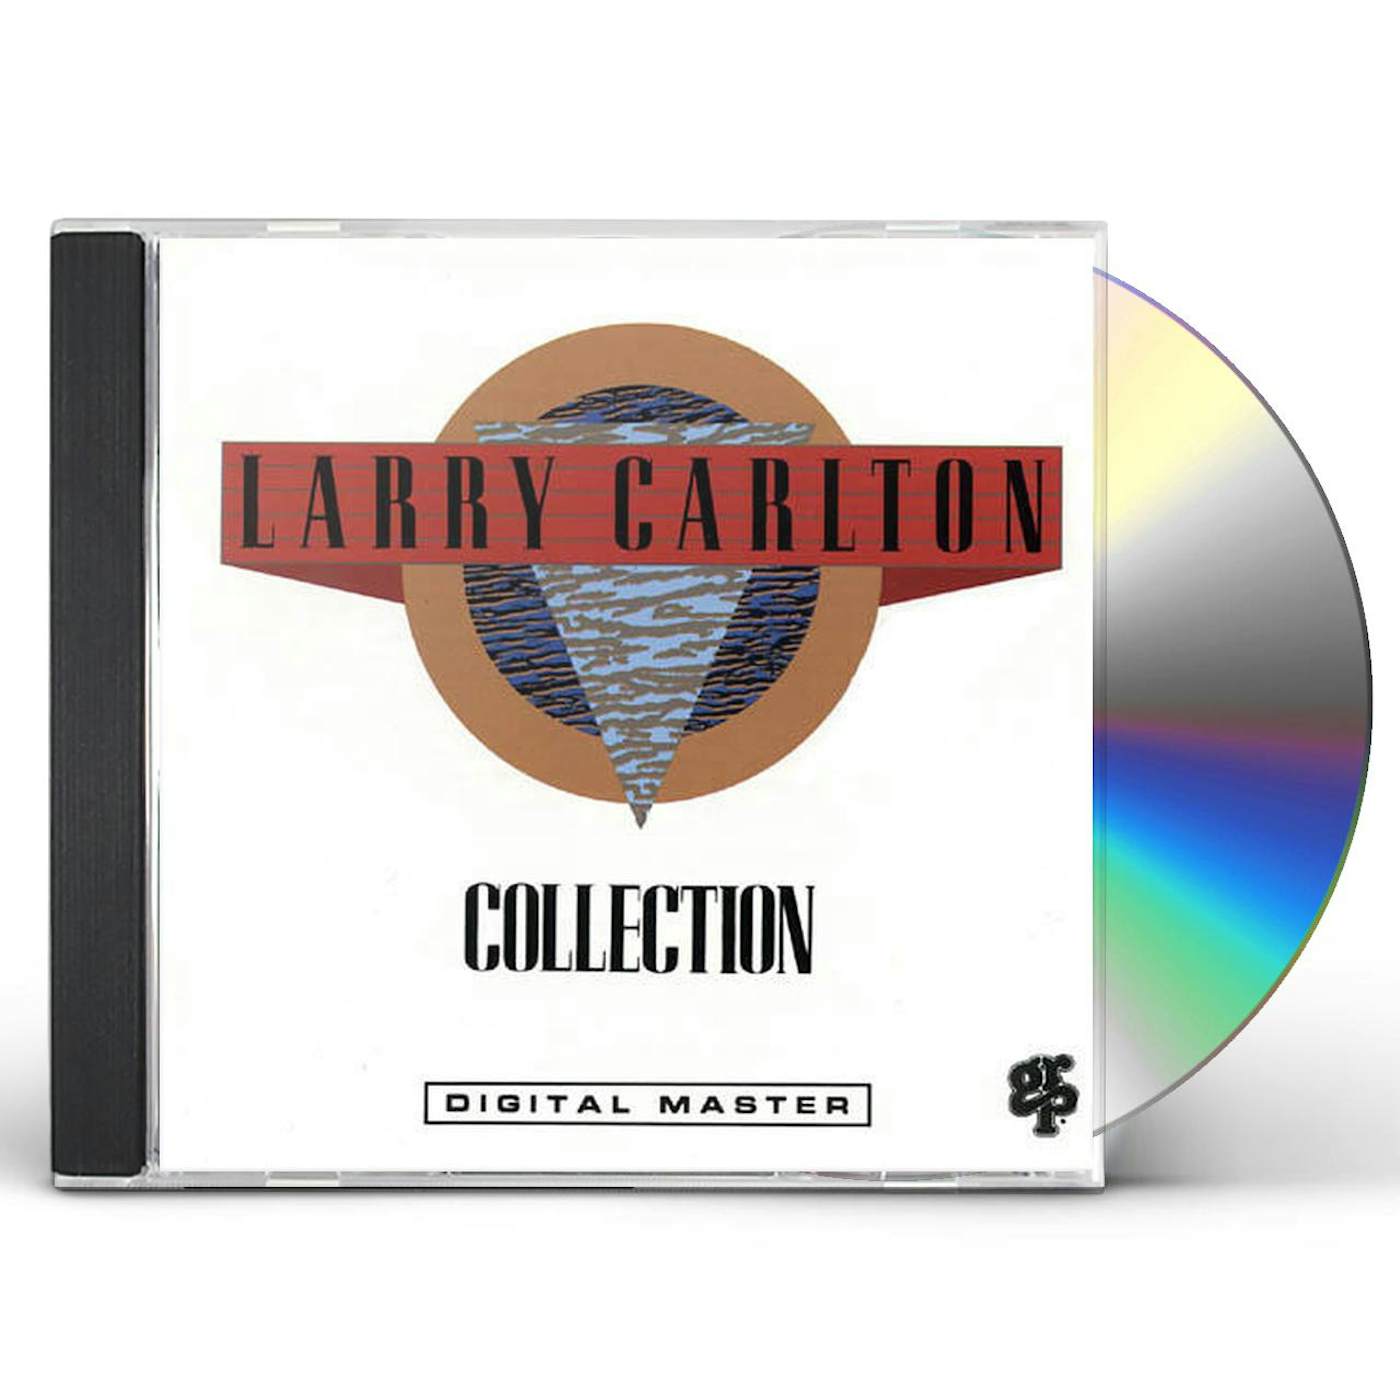 Larry Carlton COLLECTION CD